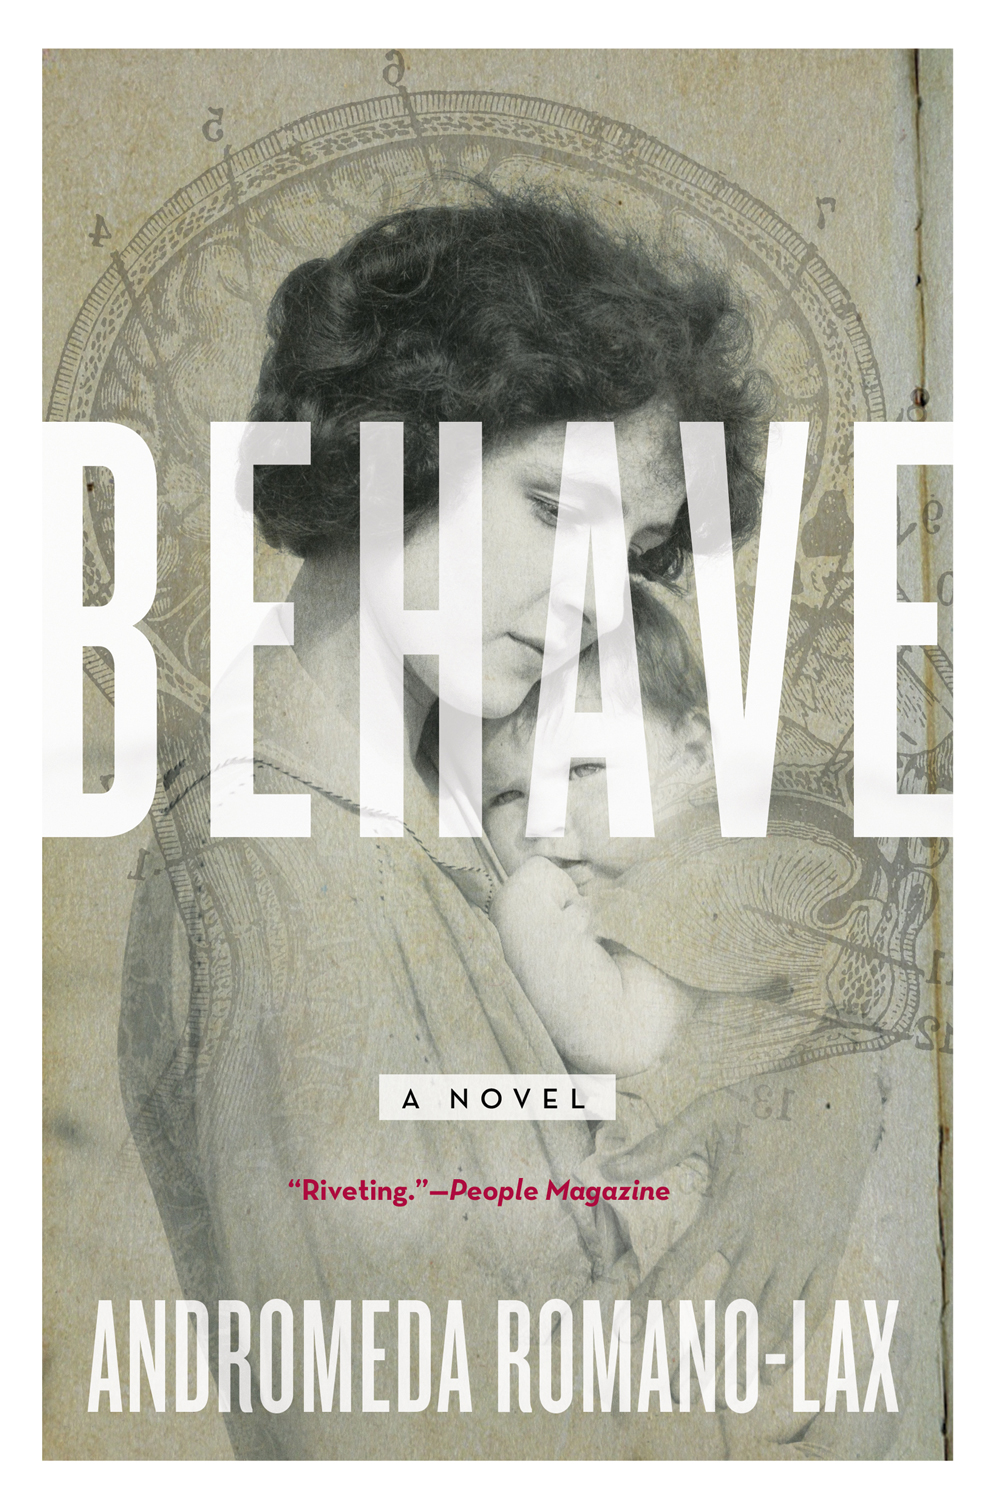 behave by andromeda romano lax